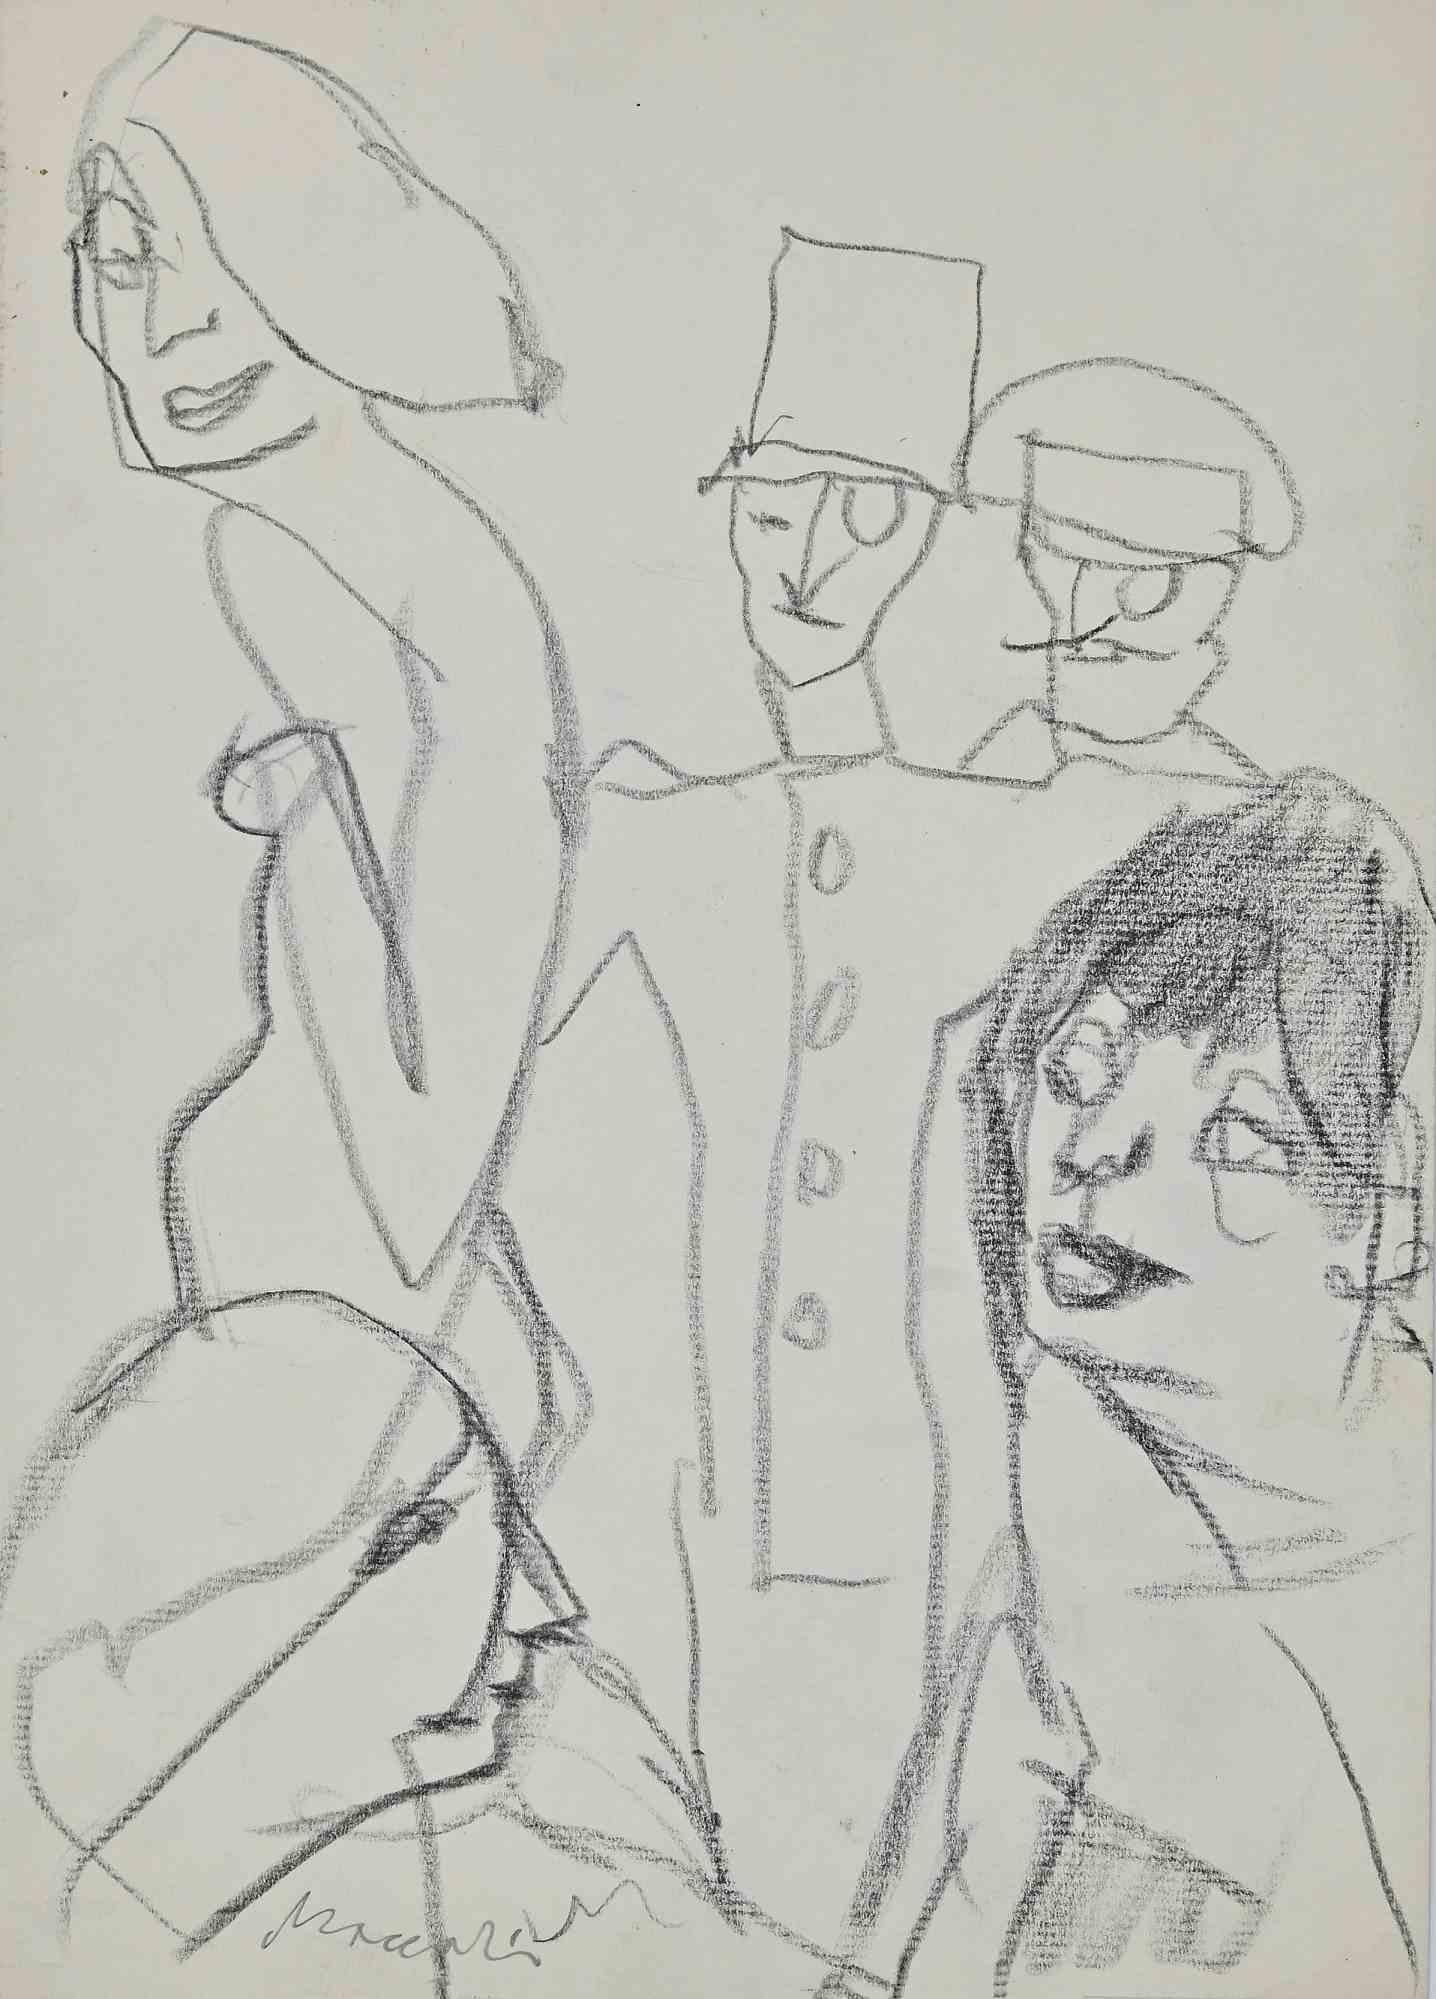 Admiration  is an original Charcoal Drawing realized by Mino Maccari in 1980.

Good condition on a white paper.

Hand-signed by the artist with pencil.

Mino Maccari (1898-1989) was an Italian writer, painter, engraver and journalist, winner the